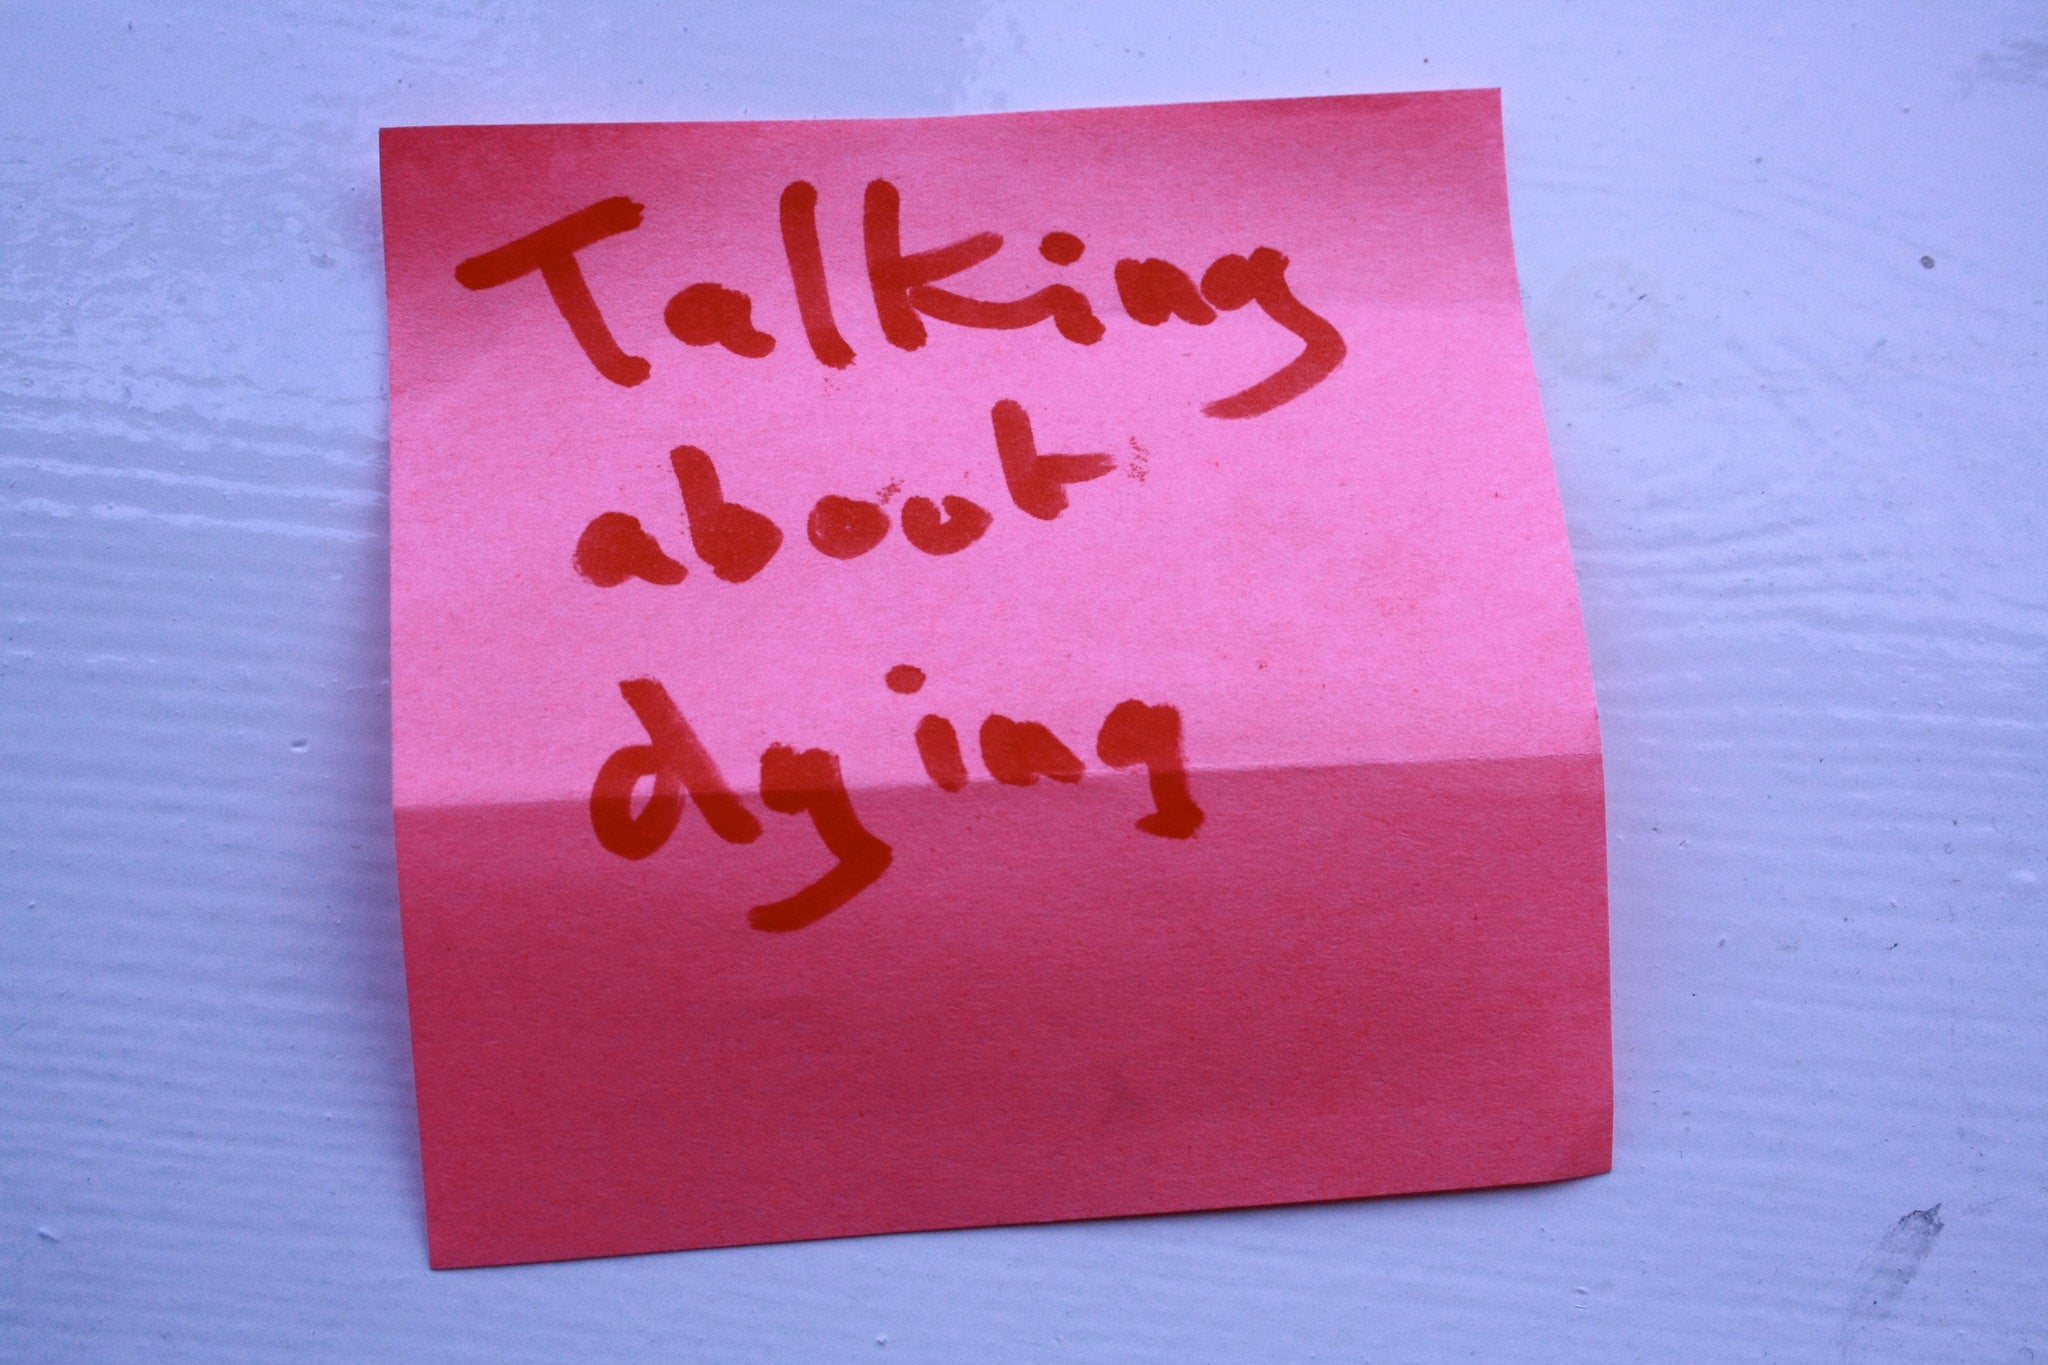 Post it with the words "Talking about dying"